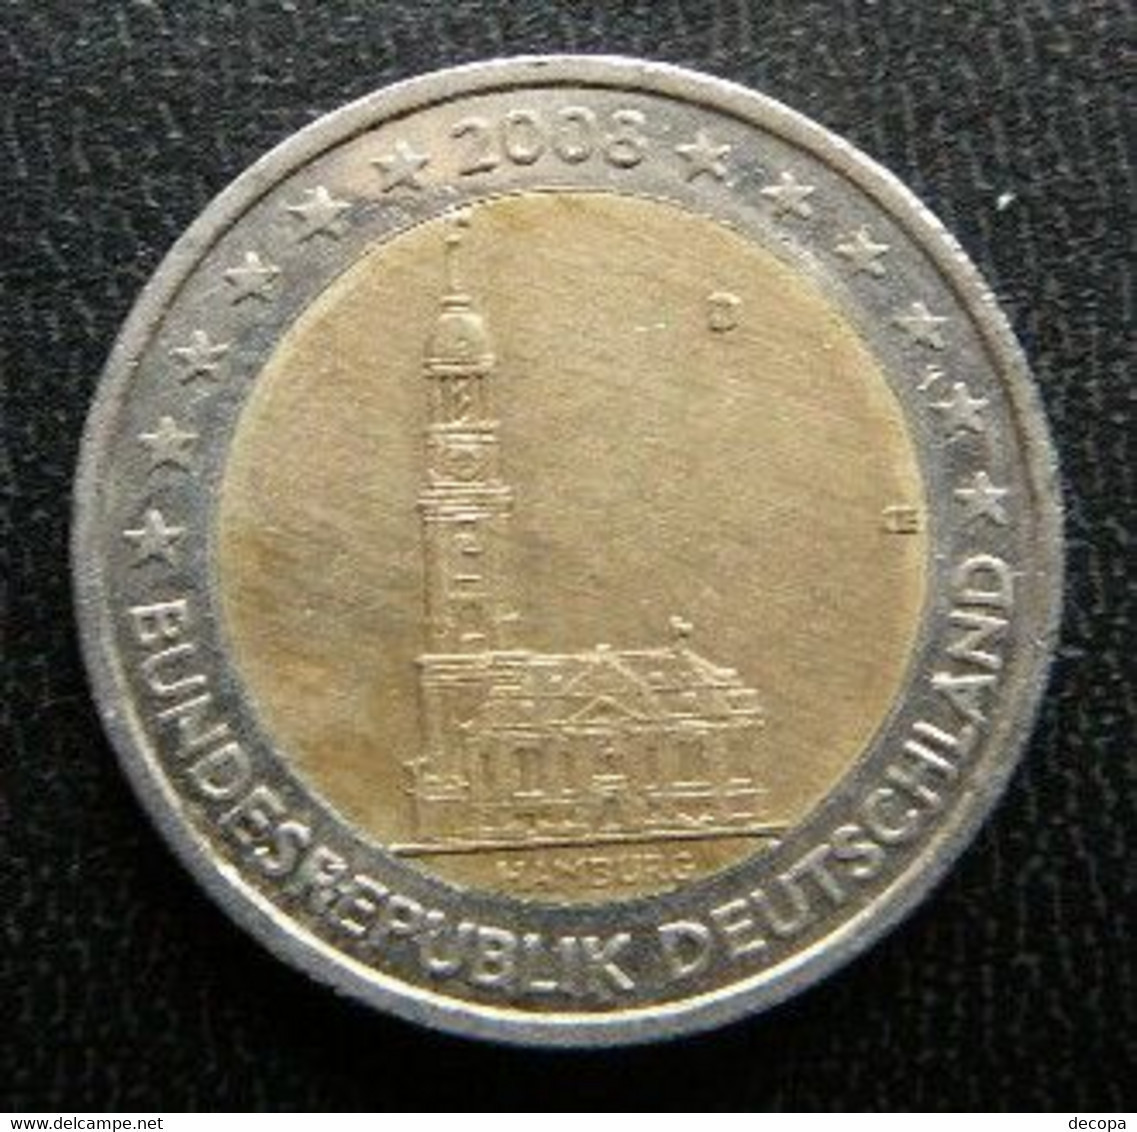 Germany - Allemagne - Duitsland   2 EURO 2008 D    Speciale Uitgave - Commemorative - Germany